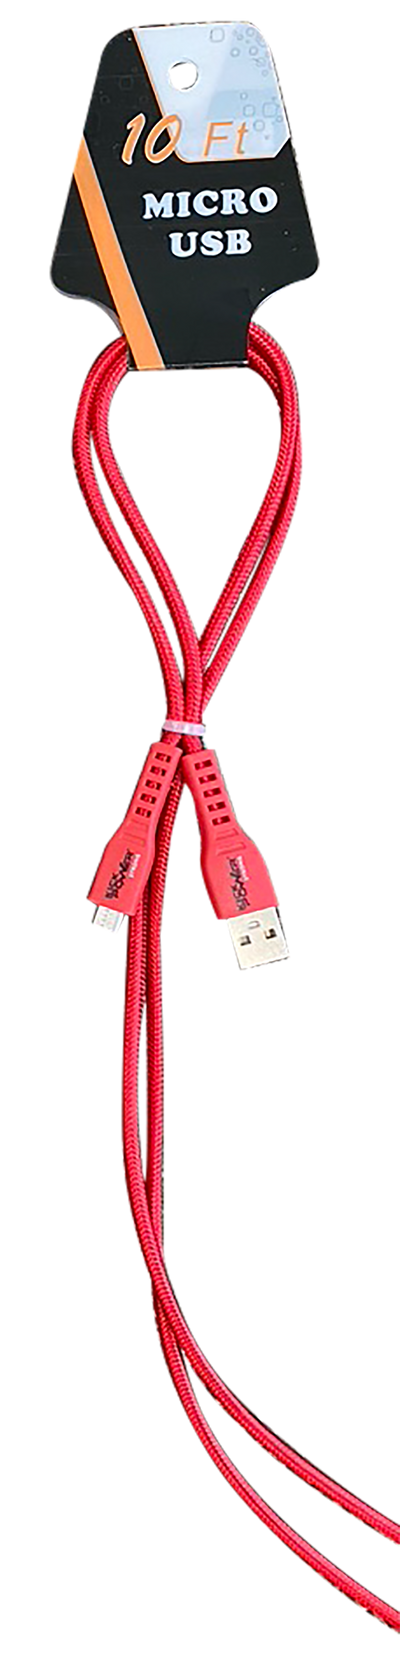 KickPOWER® Micro USB 10ft Cable